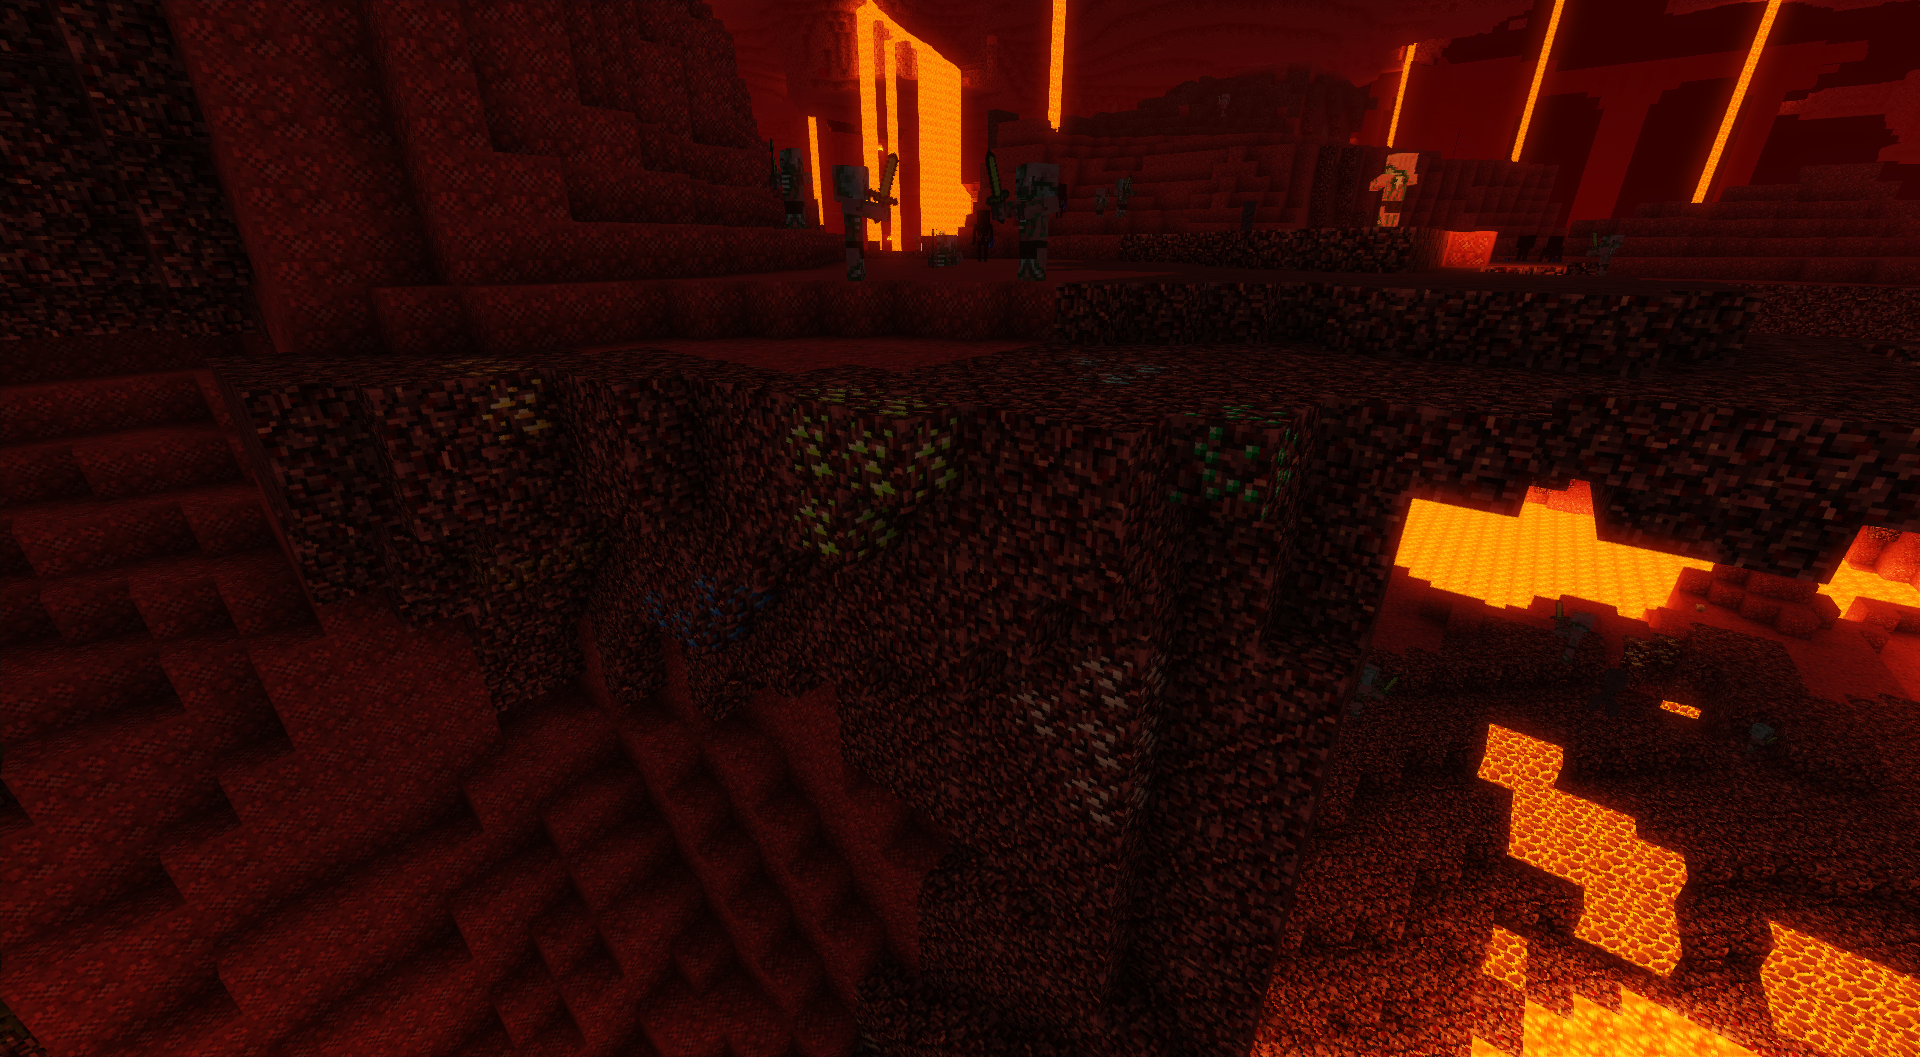 Nether ores